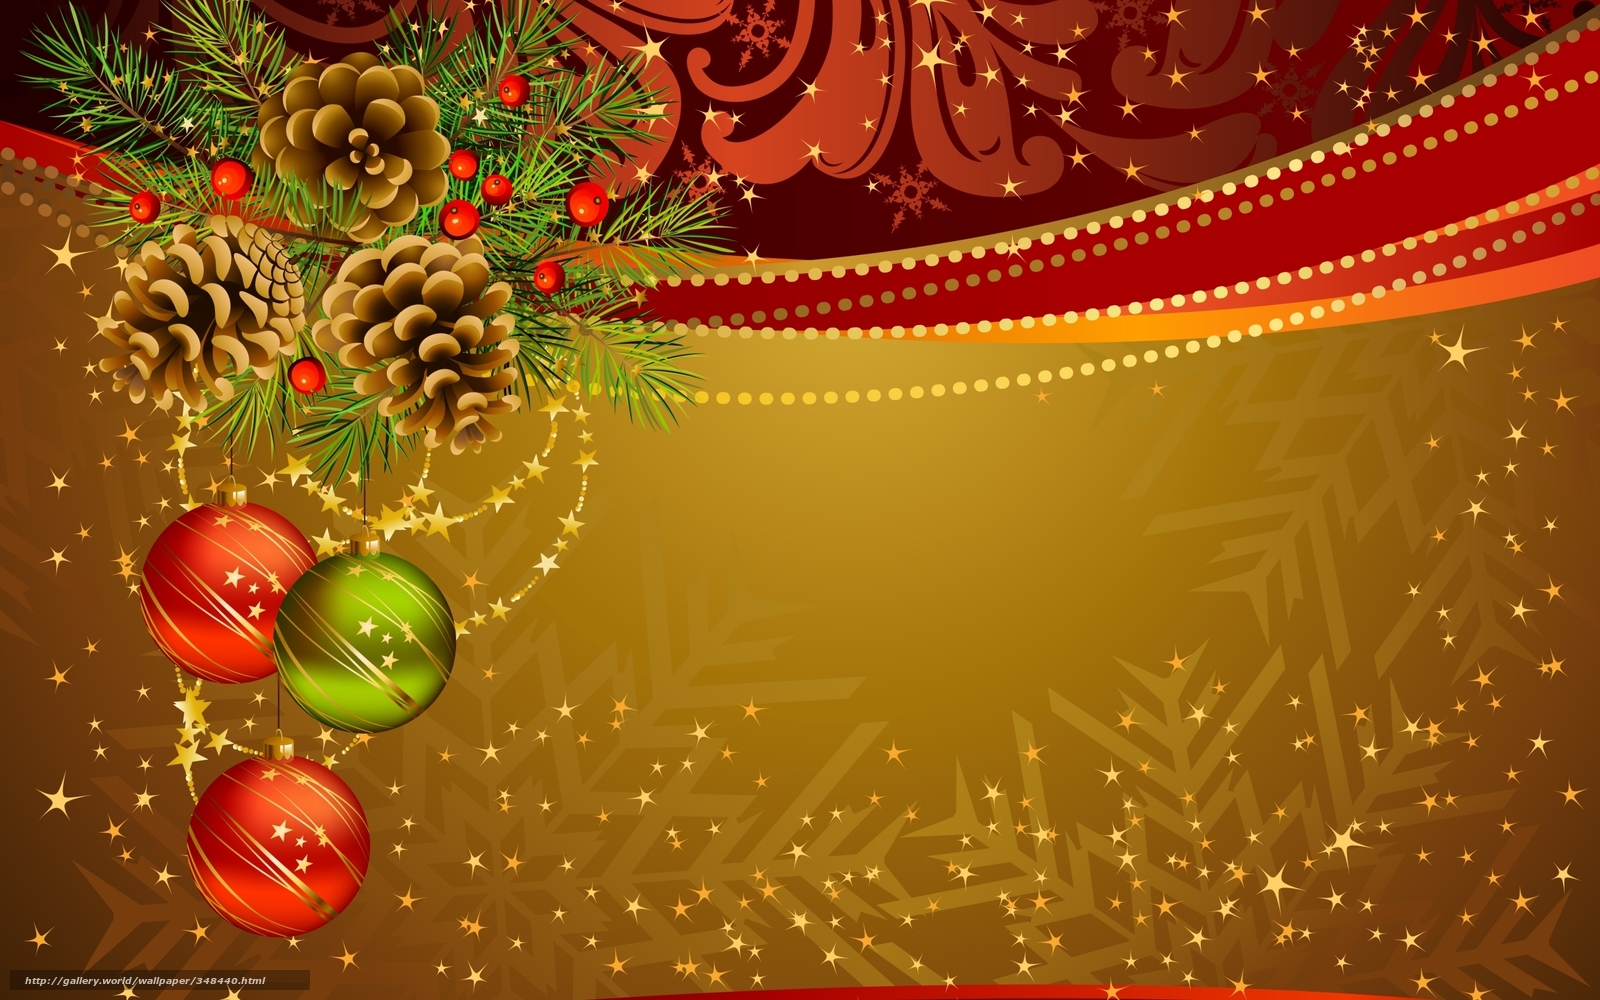 Download wallpaper New Year holiday New Wallpaper scenery free